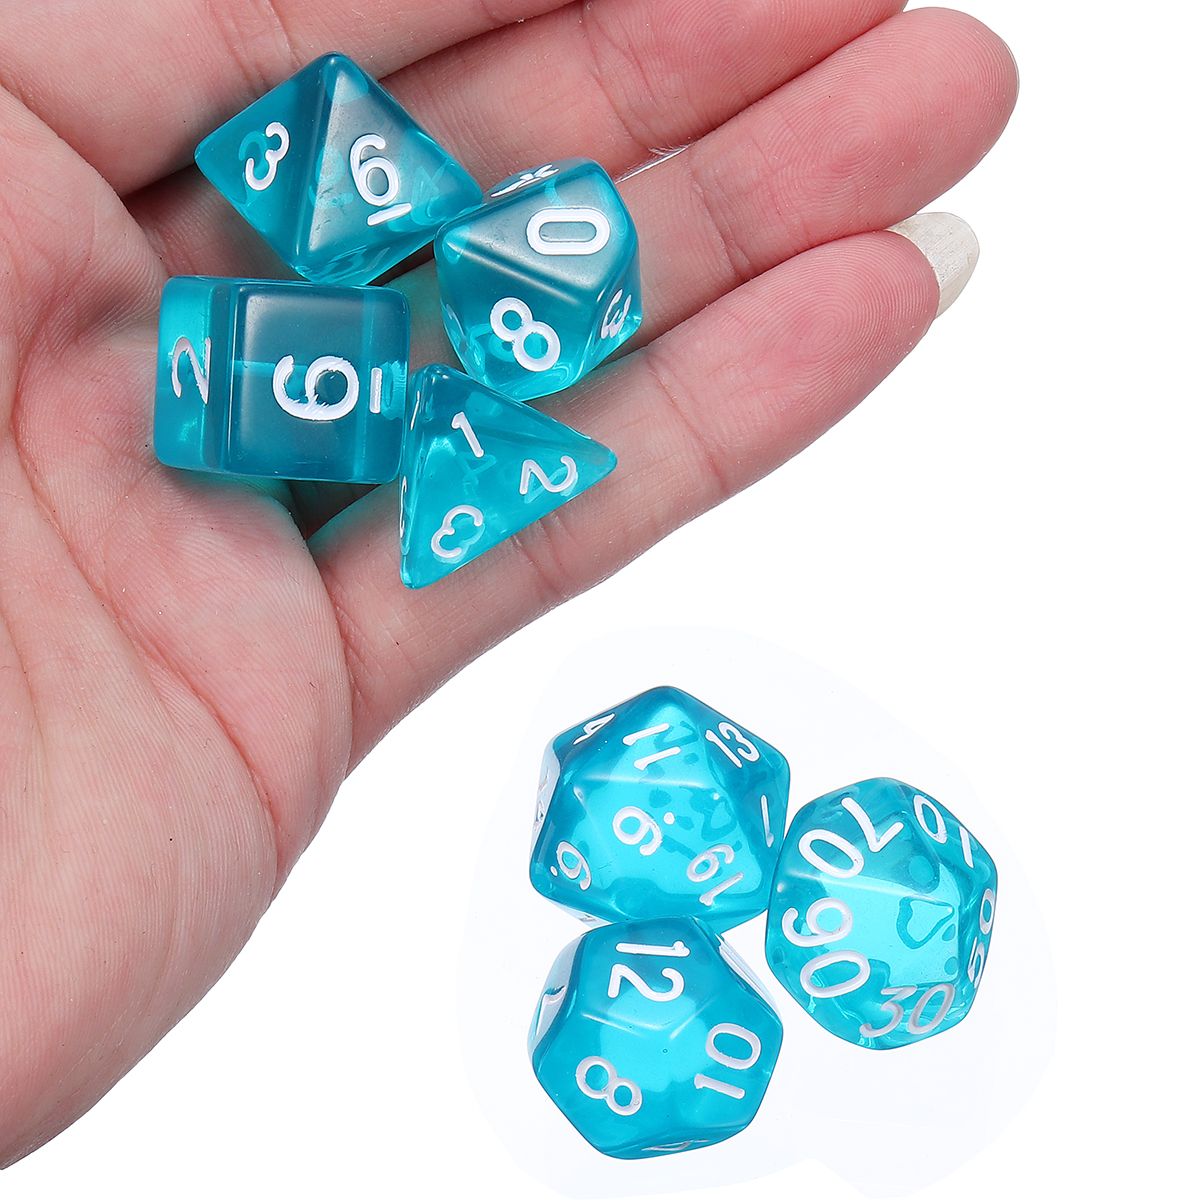 7-Pcs-Dice-Polyhedral-Dices-Set-Translucent-RPG-Gadget-Multisided-Dice-With-Bag-1360640